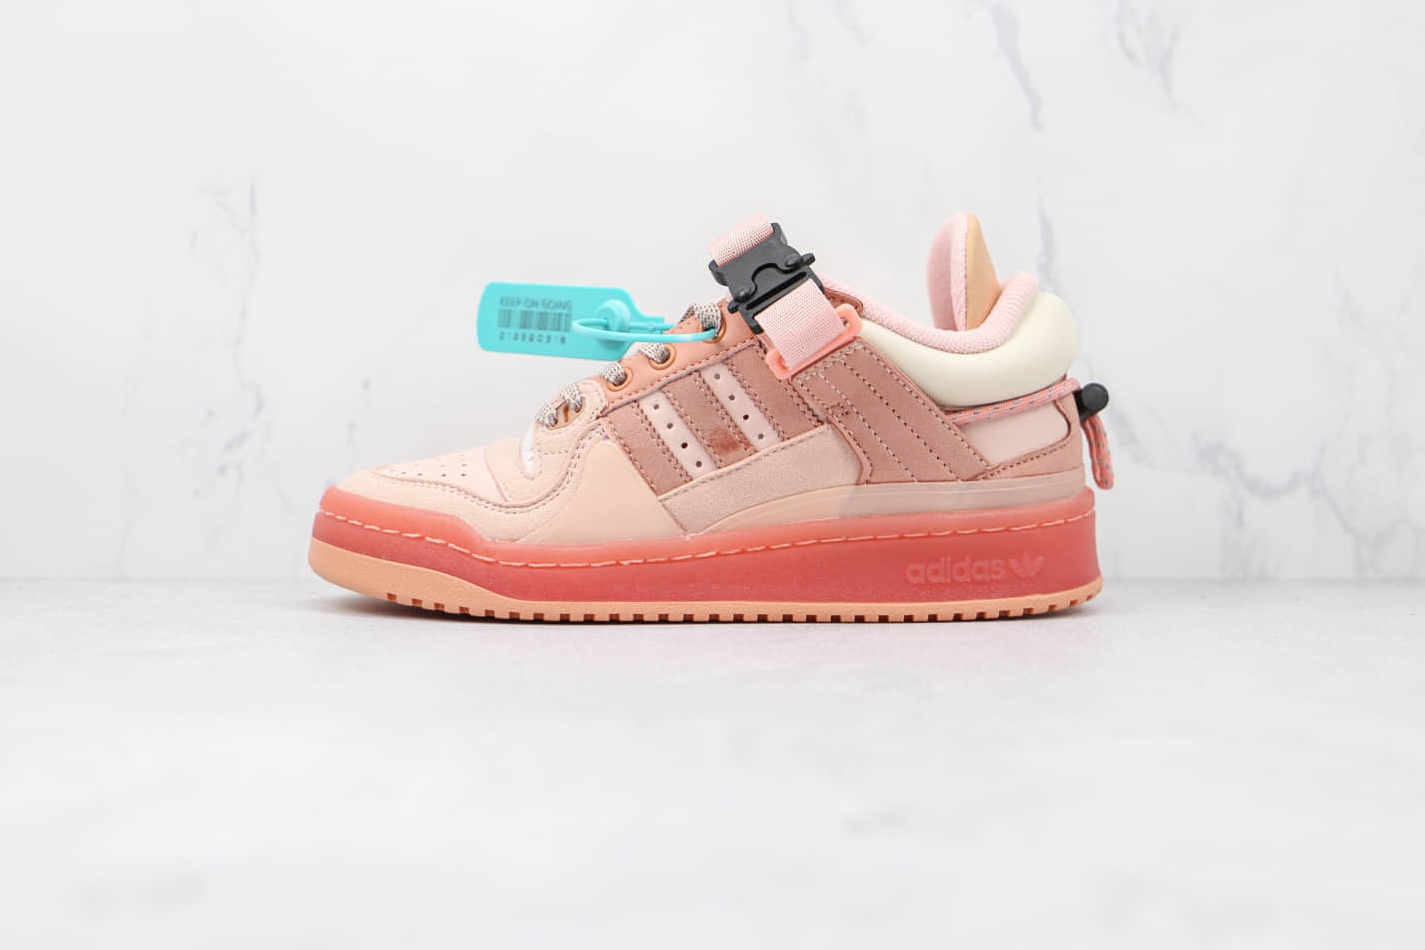 Adidas Bad Bunny x Forum Buckle Low 'Easter Egg' GW0265 - Limited Edition Collab!